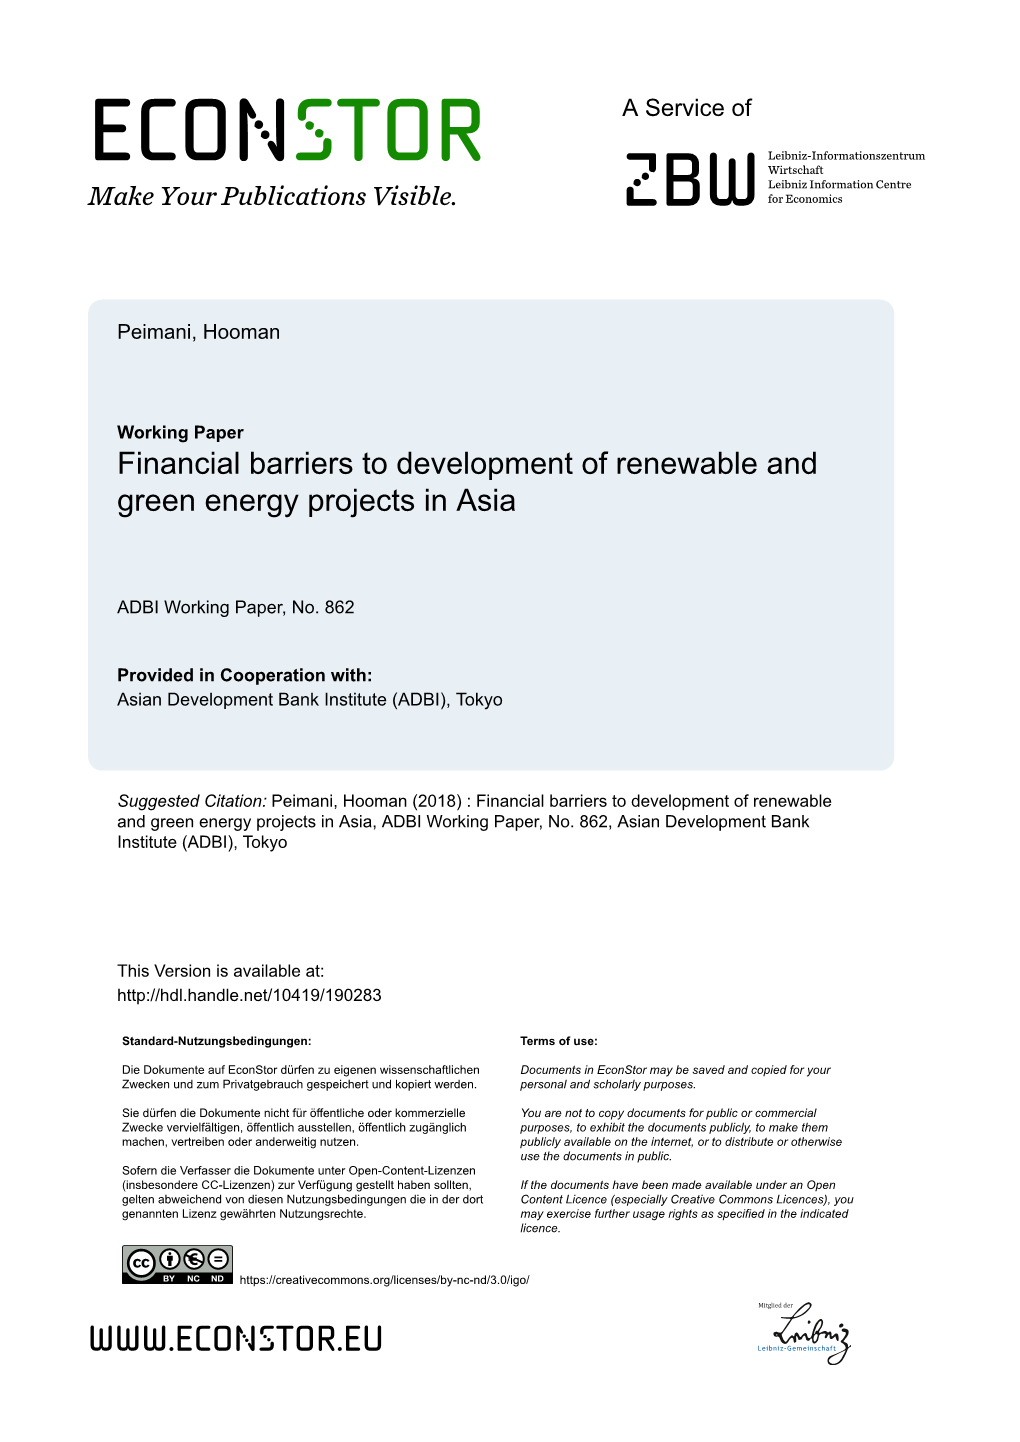 Financial Barriers to Development of Renewable and Green Energy Projects in Asia